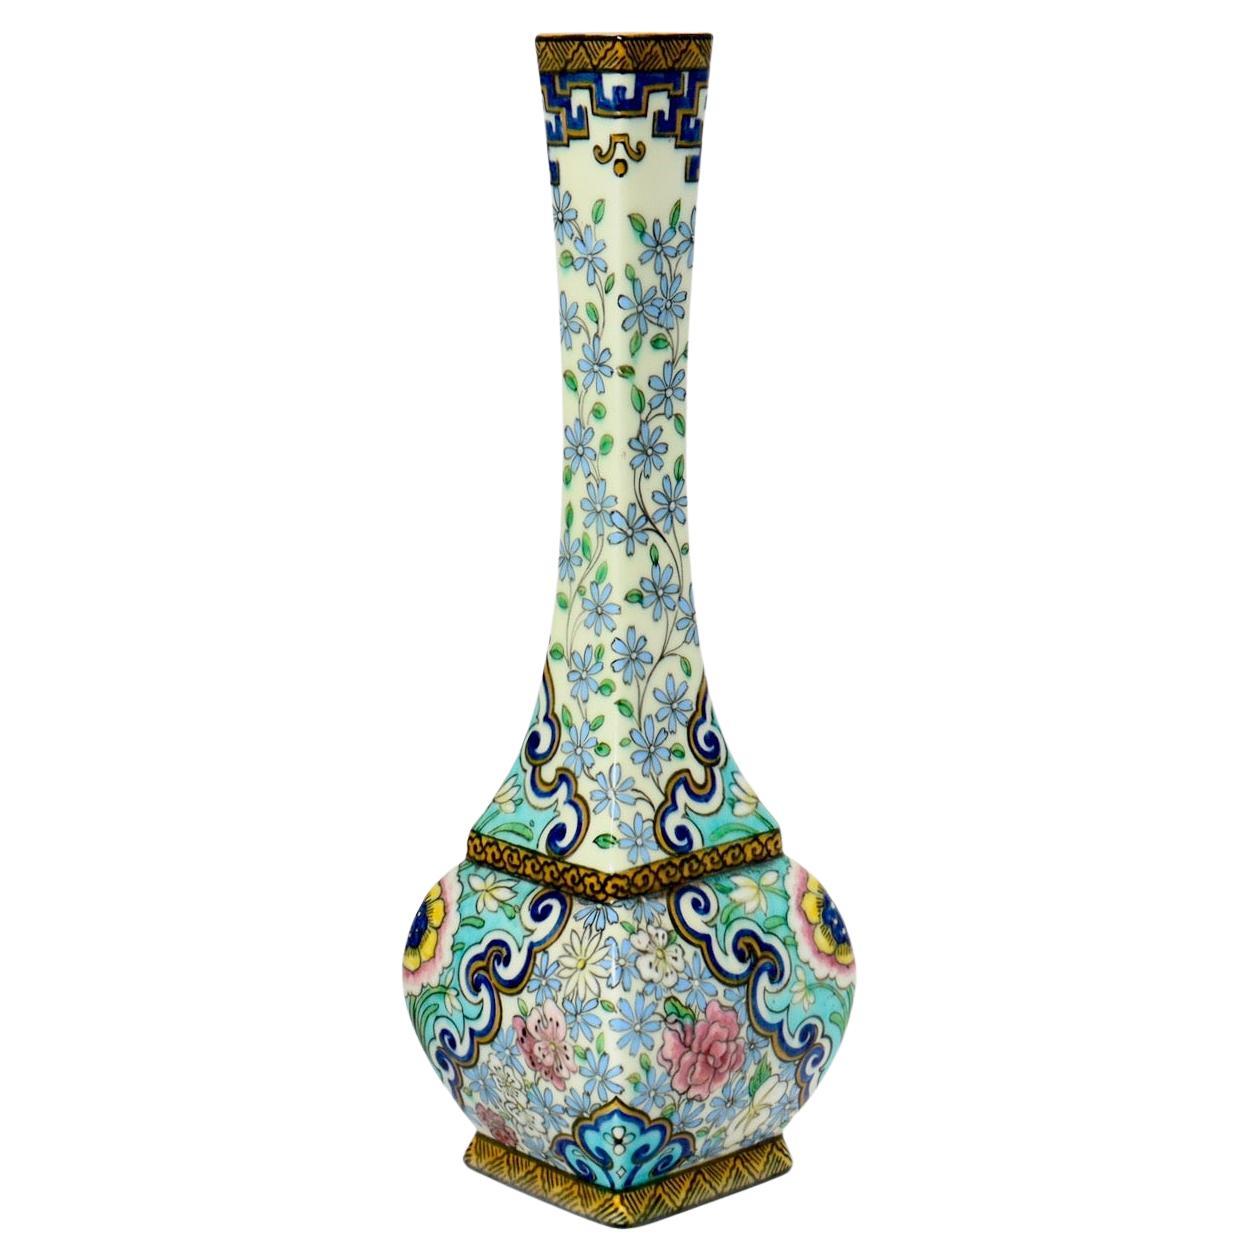 Théodore DECK (1823-1891)
A polychromatic enamelled earthenware soliflore and quadrangular shape vase with Sino-Japanese inspiration design of flowers and geometrical friezes all around.
Impressed uppercase mark 